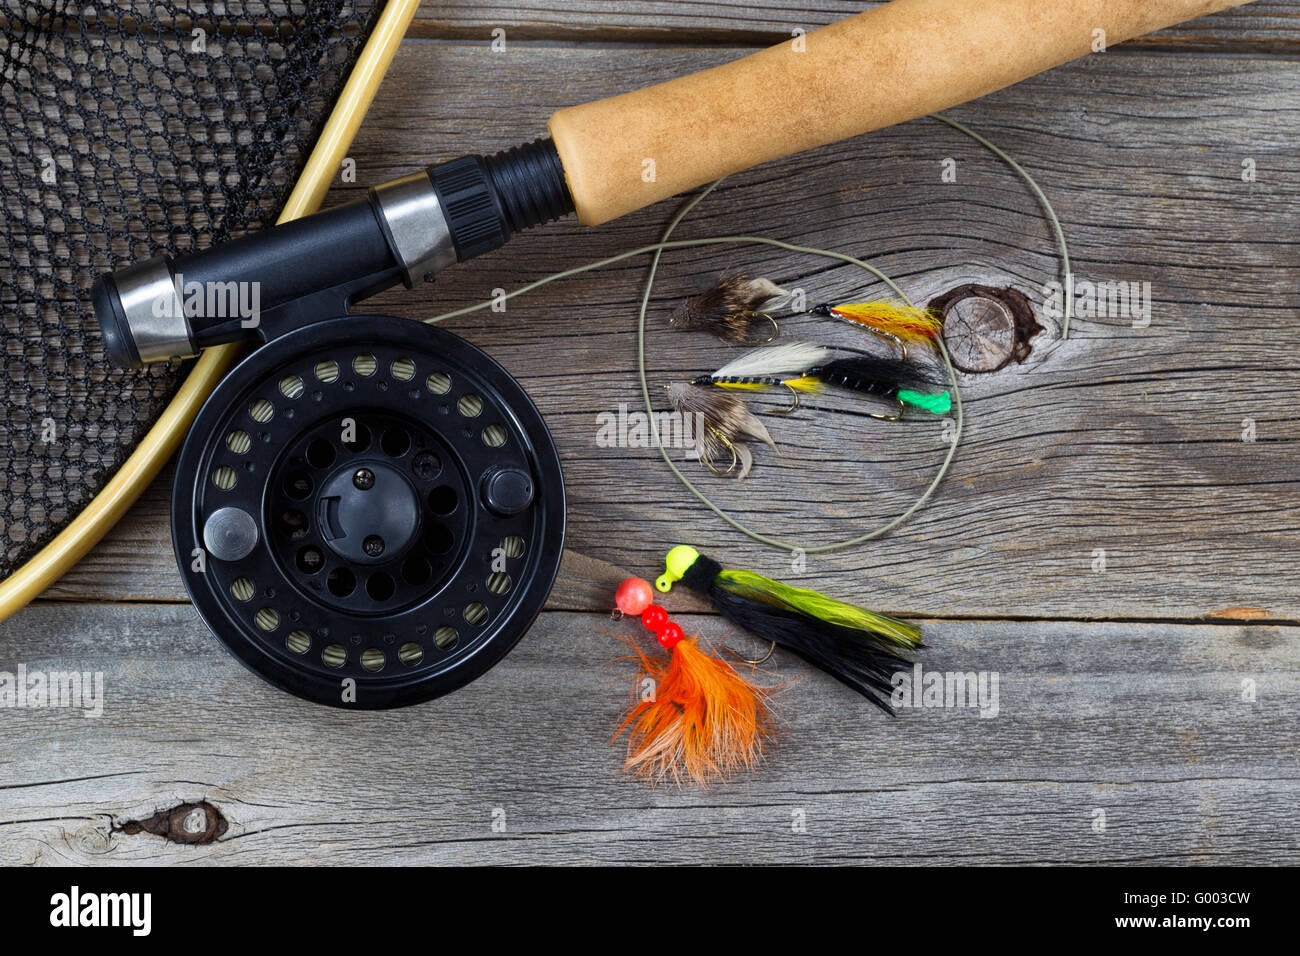 Fishing Fly reel with accessories on wood Stock Photo